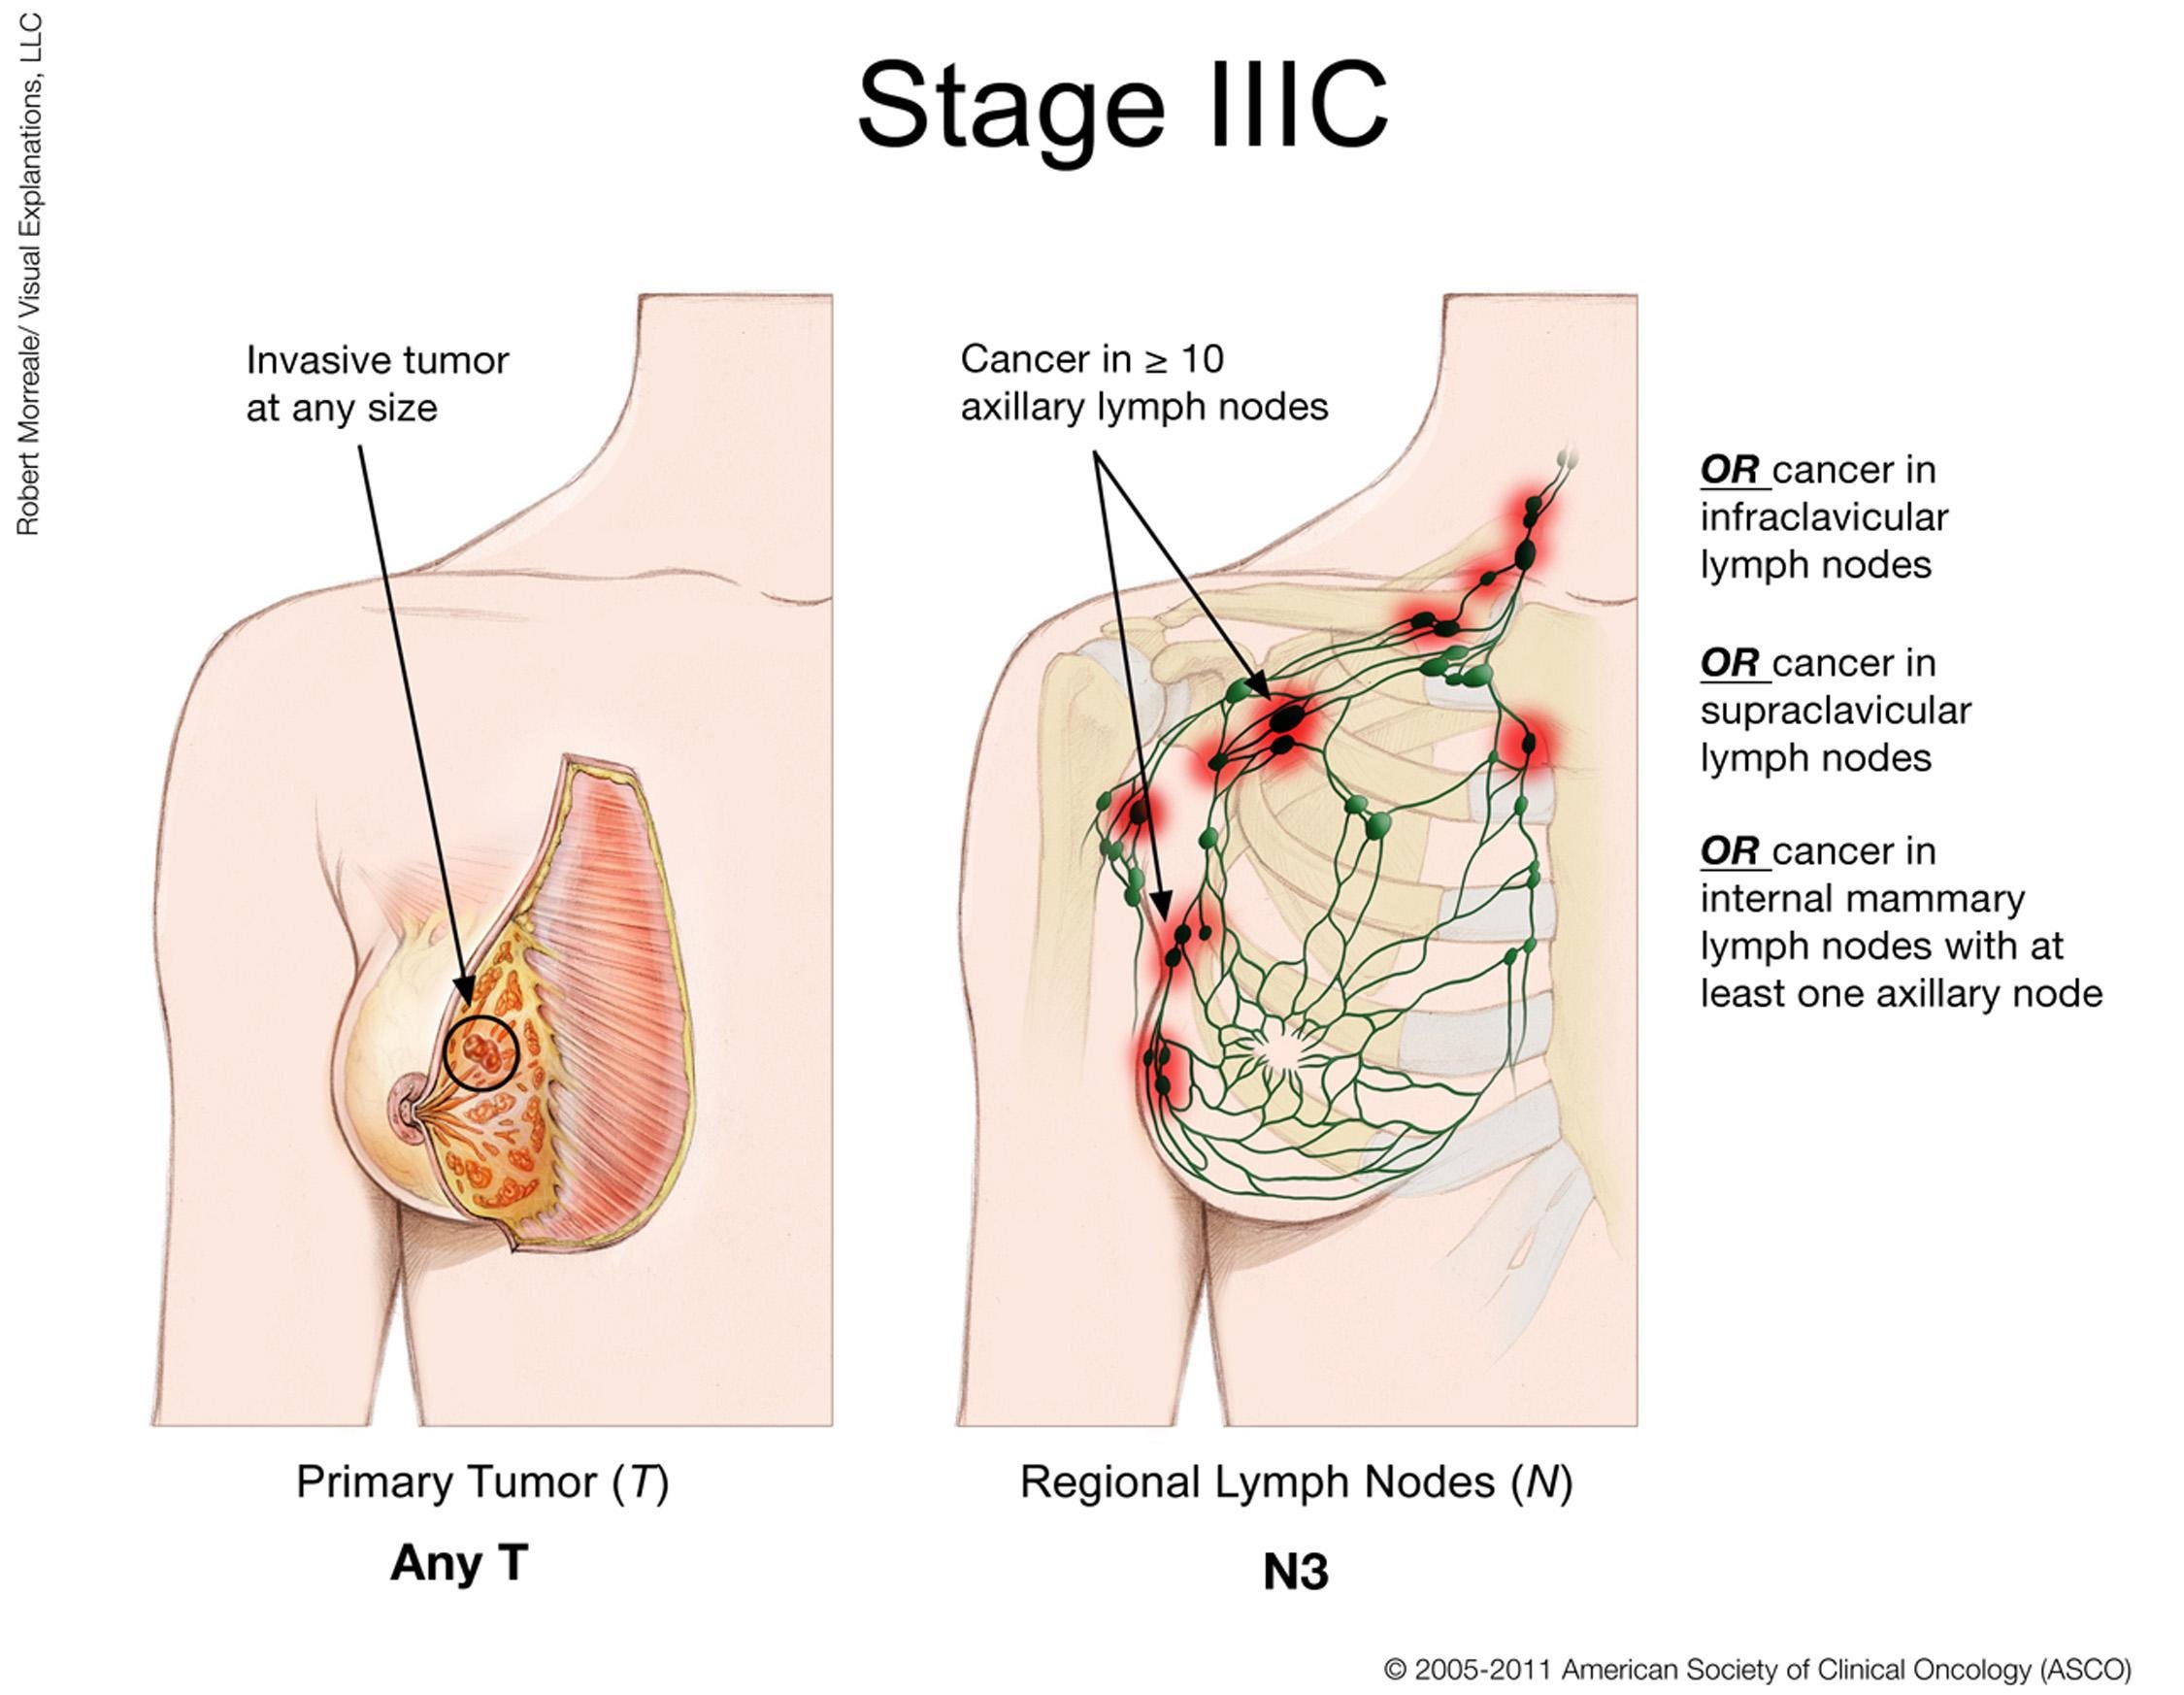 Breast Cancer (Stage IIIC)